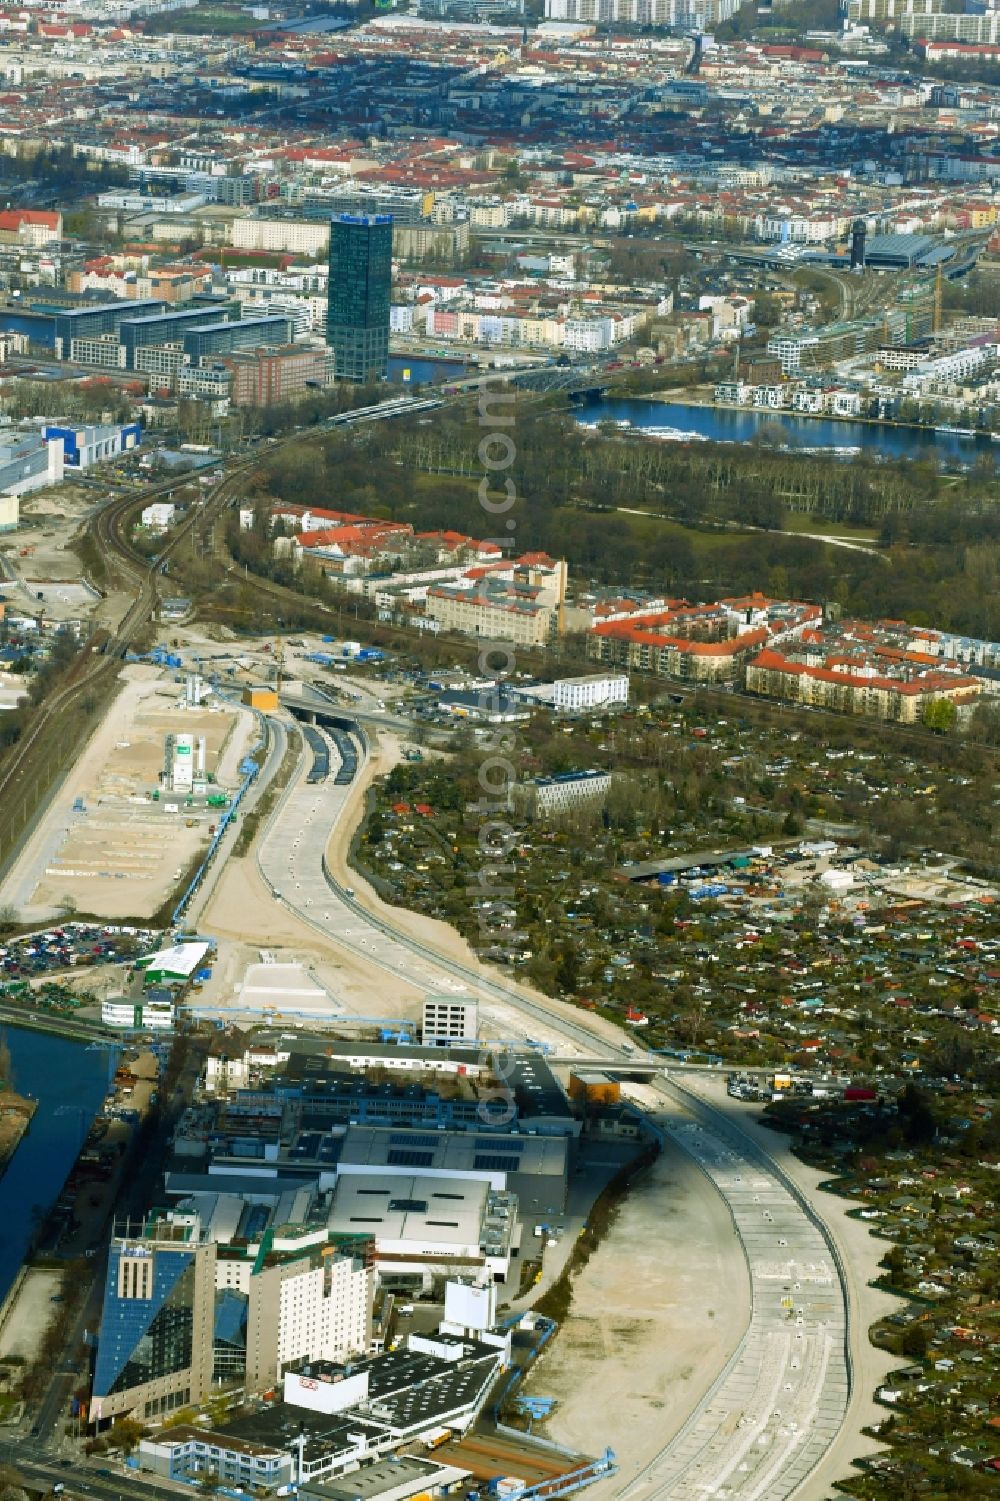 Berlin from the bird's eye view: Civil engineering construction sites for construction of the extension of the urban motorway - Autobahn Autobahn A100 in Berlin Neukoelln